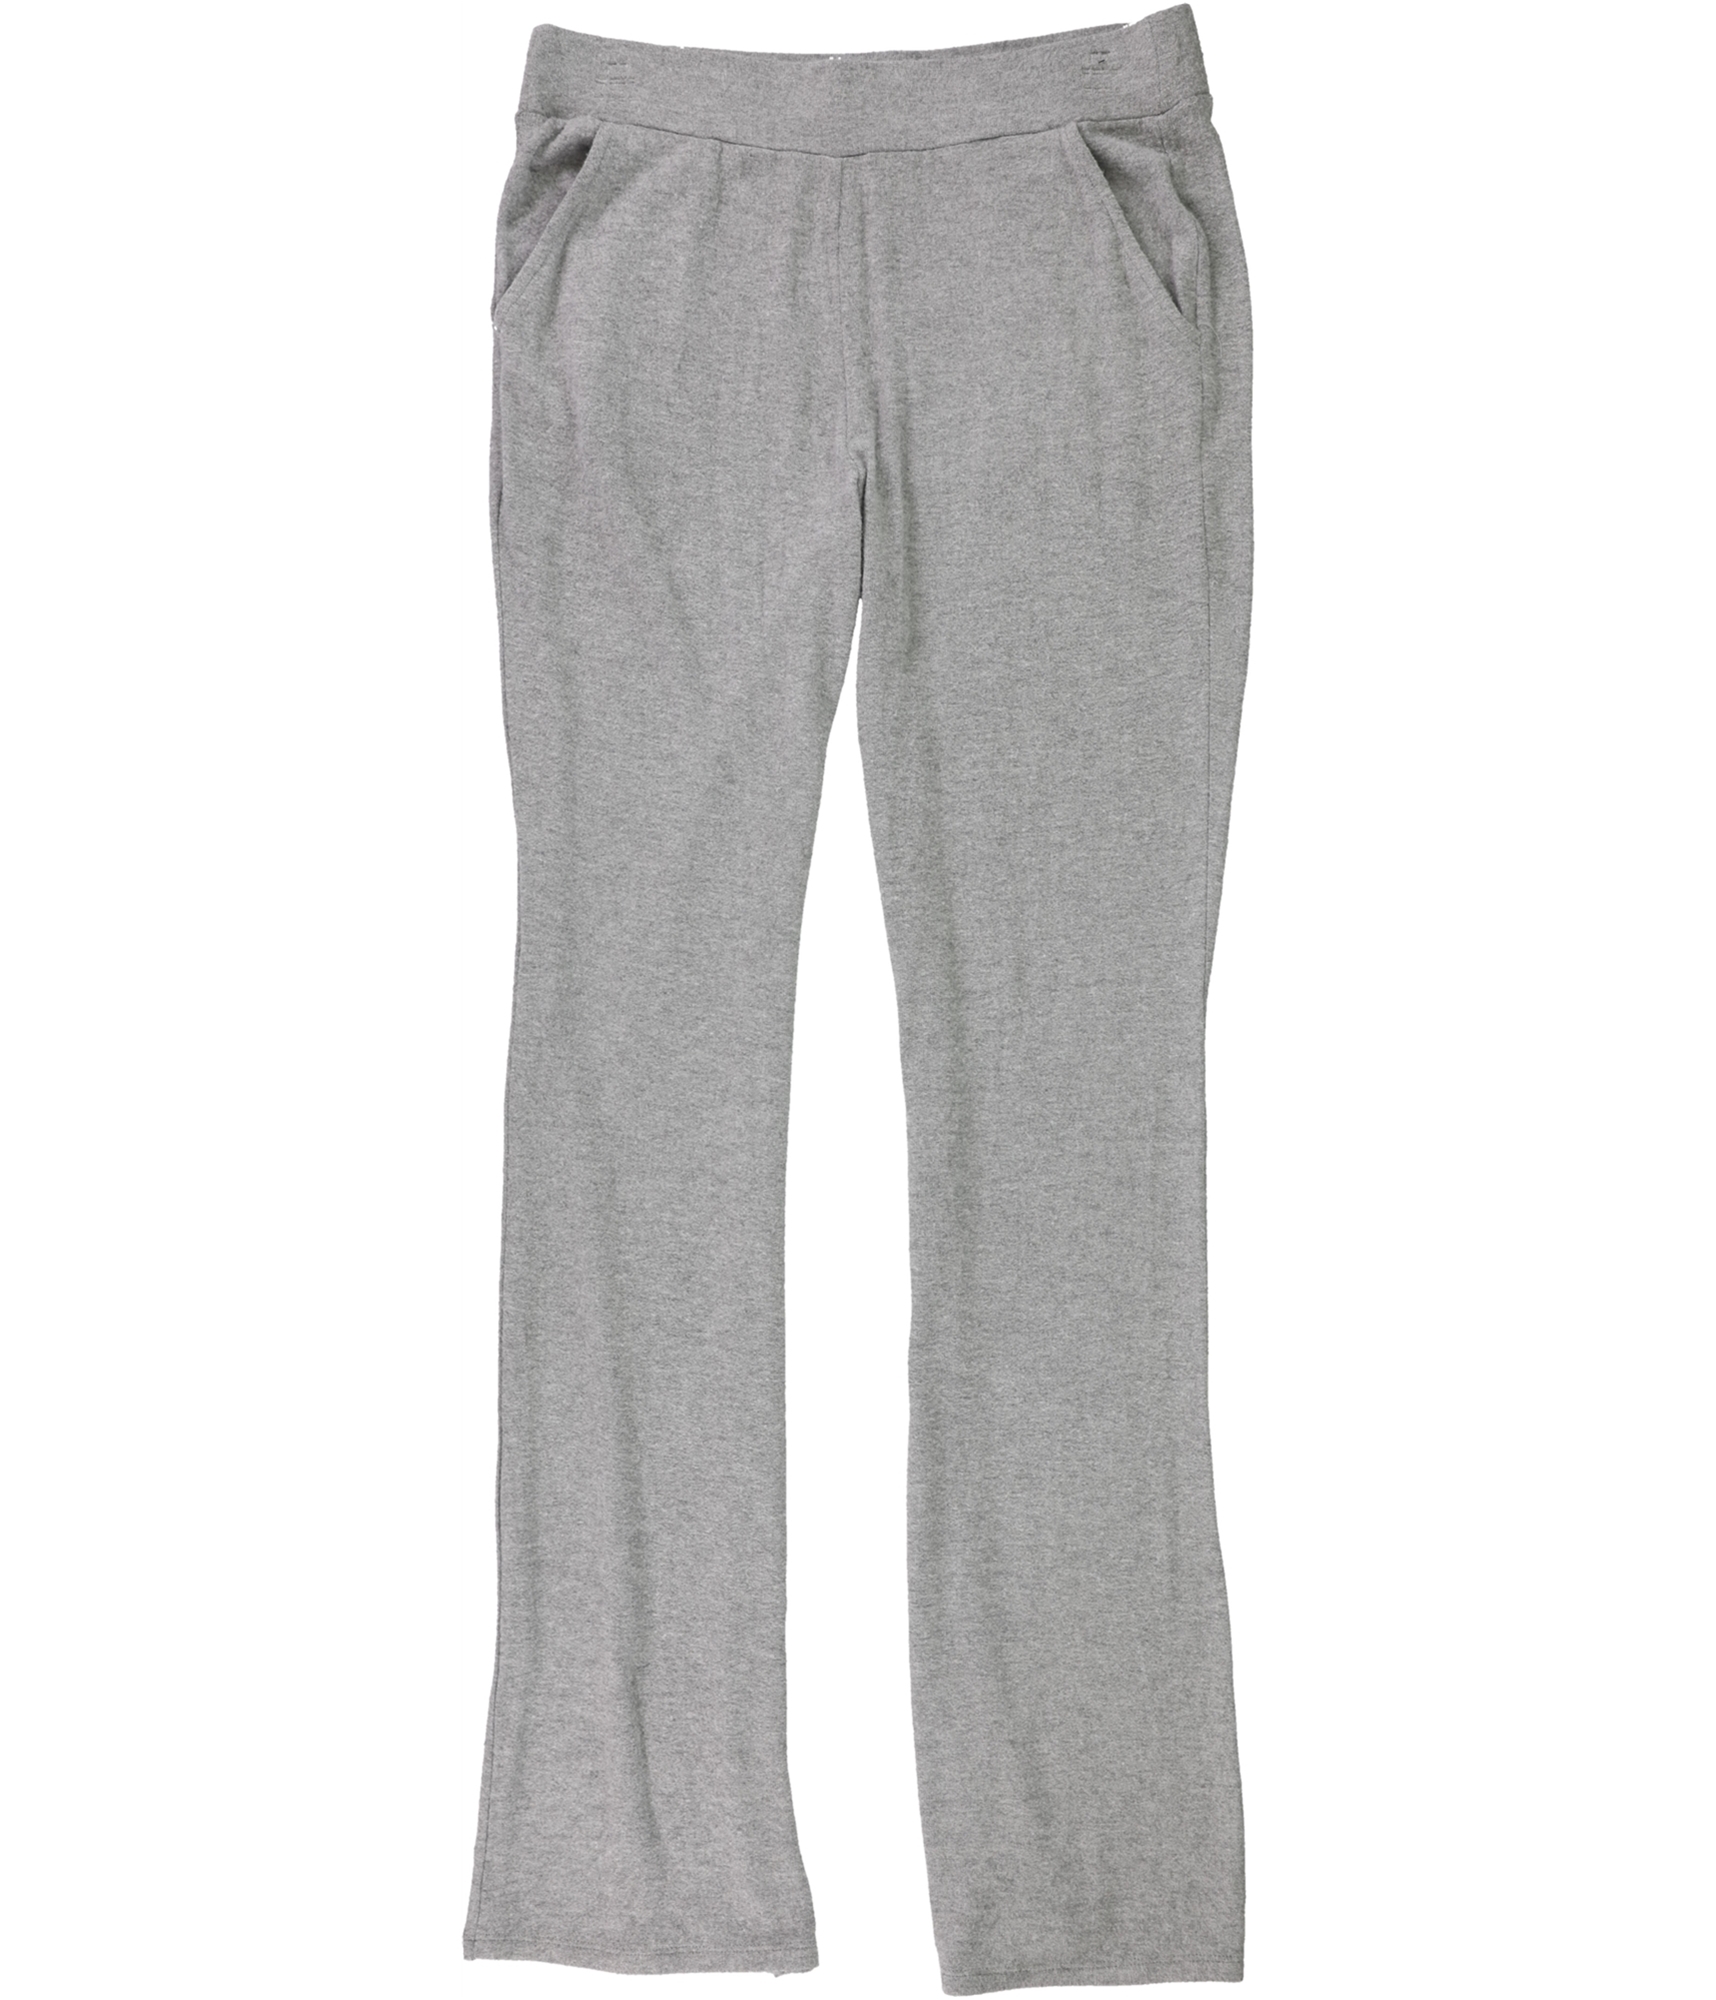 GUESS Womens Opal Casual Lounge Pants, Grey, Small 